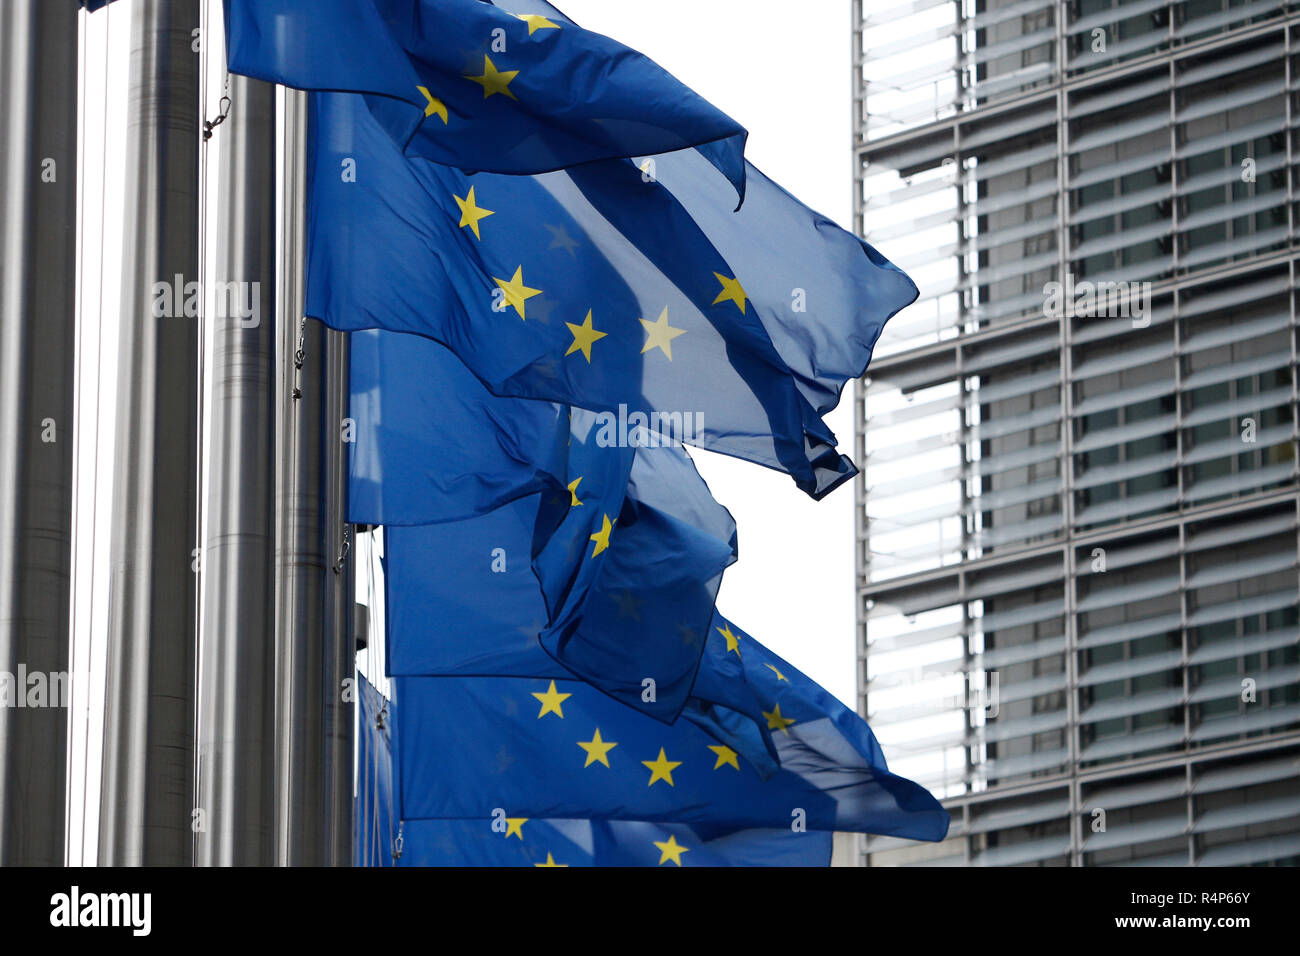 European flags flap in the wind outside EU headquarters in Brussels, Belgium on Nov. 28, 2018. Alexandros Michailidis/Alamy Live News Stock Photo